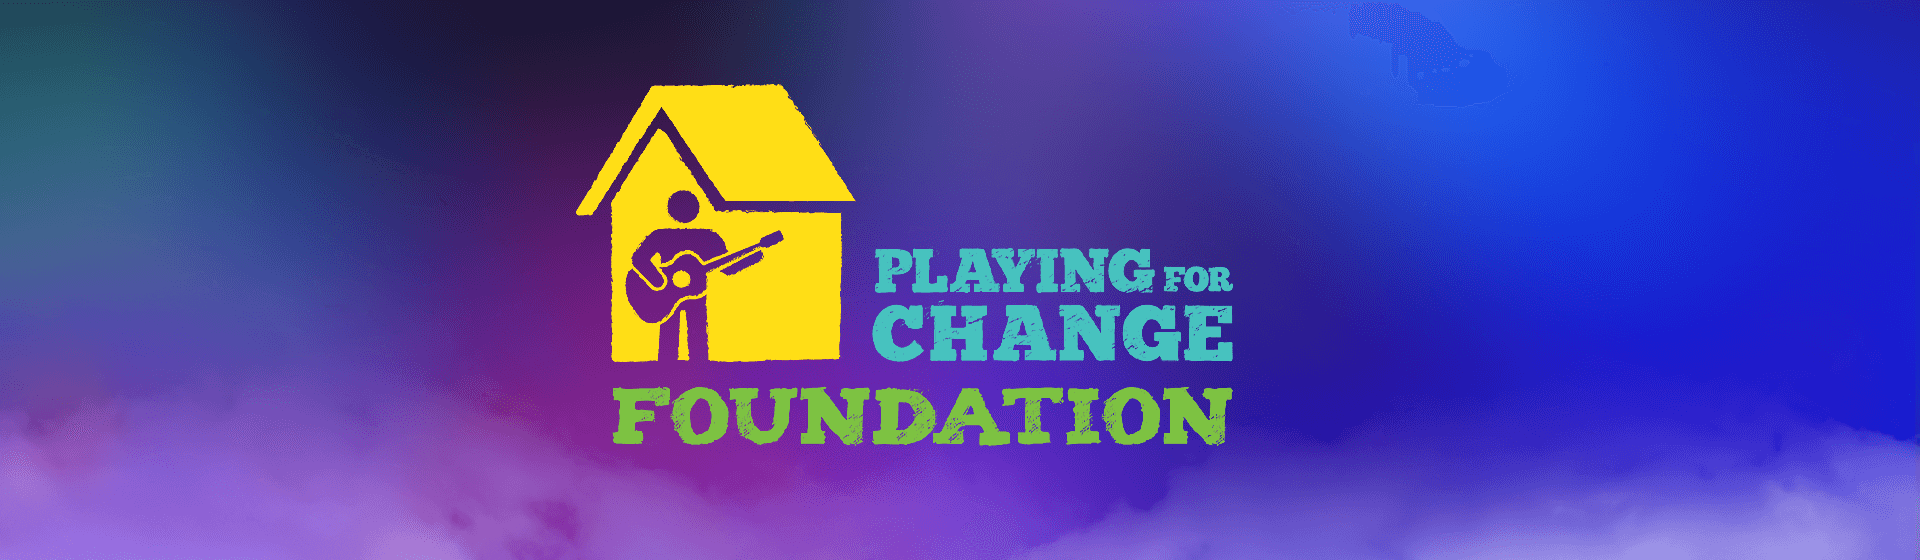 Playing for Change songs and videos - CEEK.com